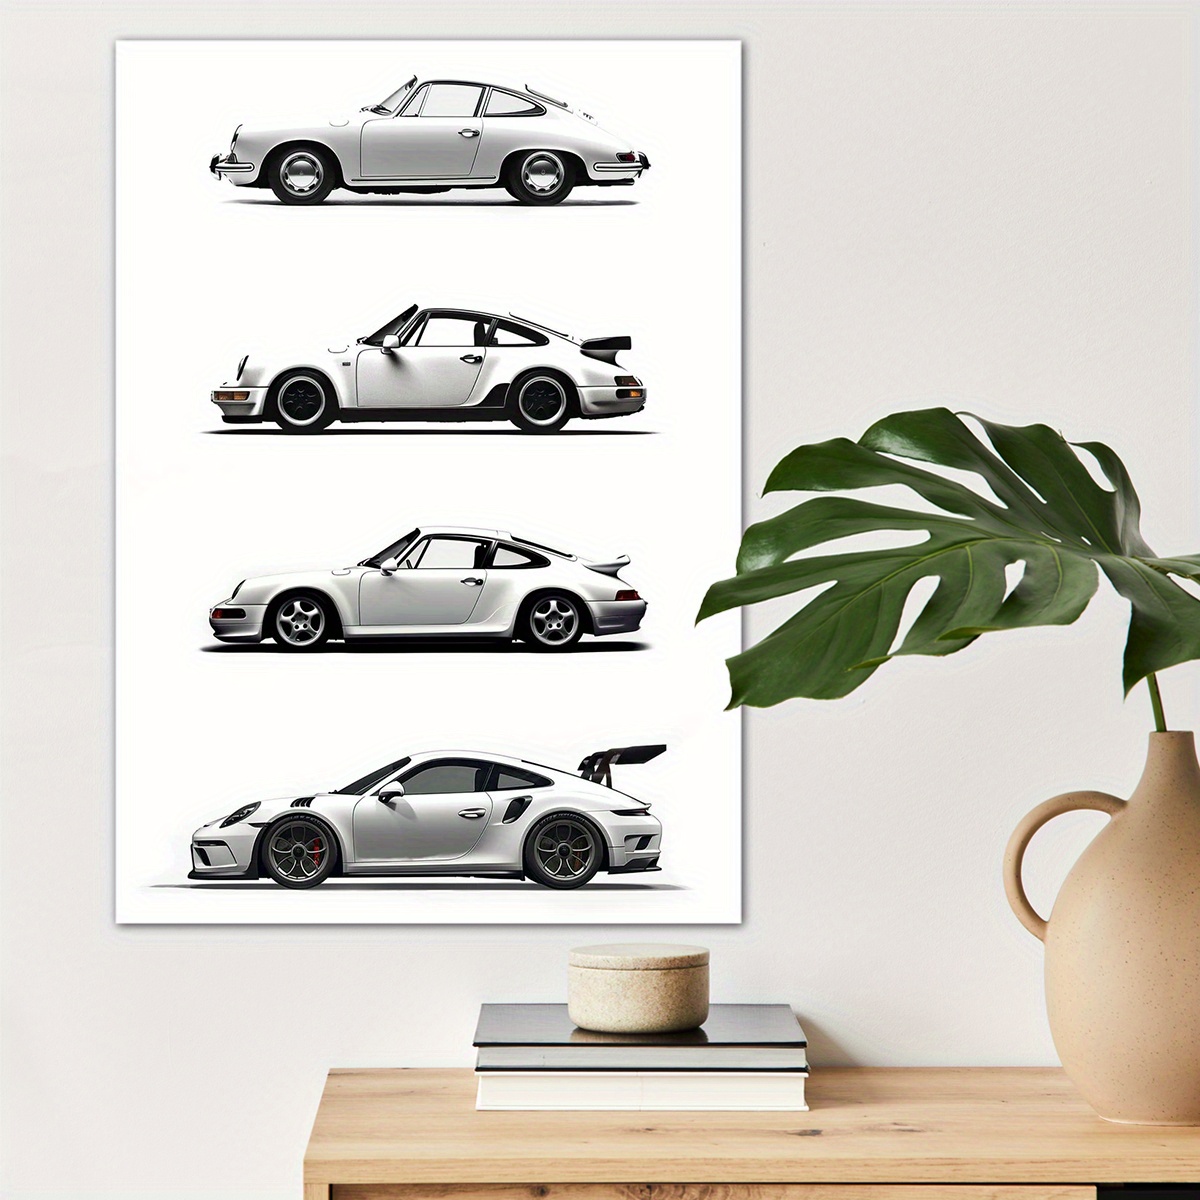 

1pc Wall Art For Home Decor, Car Lovers Poster Wall Decor Roadster Canvas Prints For Living Room Bedroom Kitchen Office Cafe Decor, Perfect Gift And Decoration Eid Al-adha Mubarak